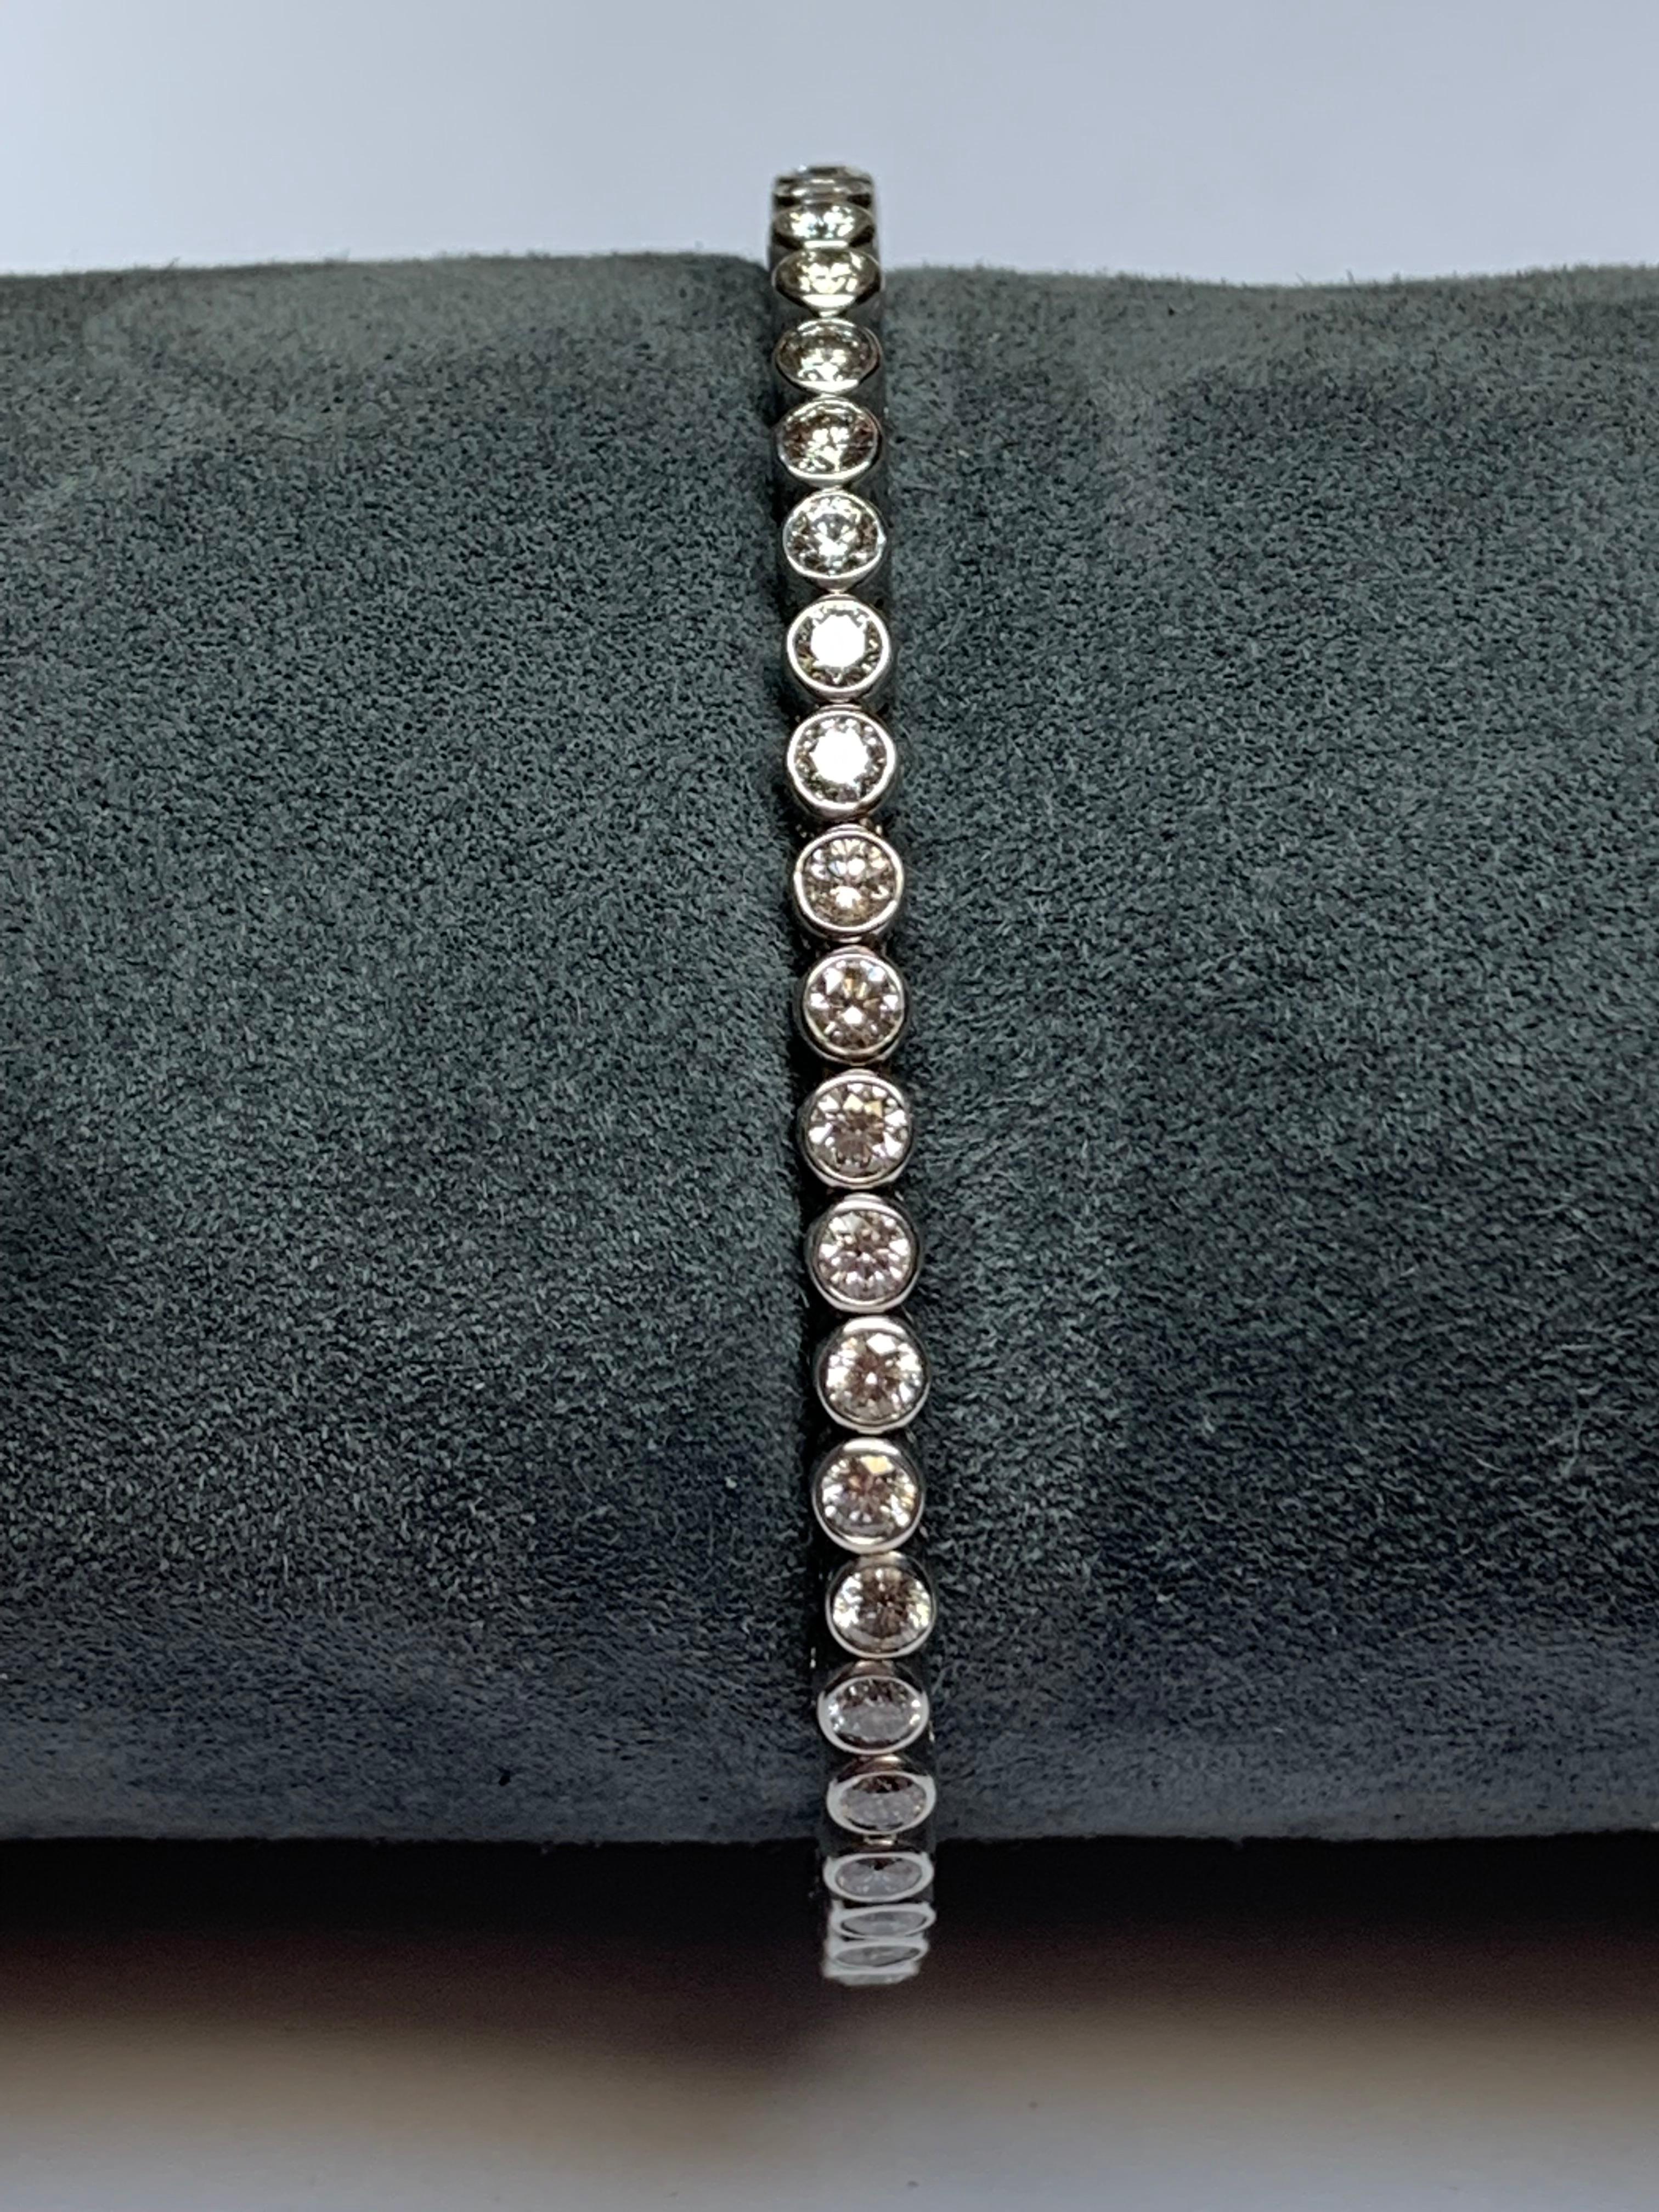 This Jean Vitau classic spring loaded bangle bracelet set with 4.35 carats of G+ color VVS clarity diamonds, all perfectly bezel set, is incredible. The triple spring manufacturing allows it to sit perfectly on any wrist. We have this piece in Blue